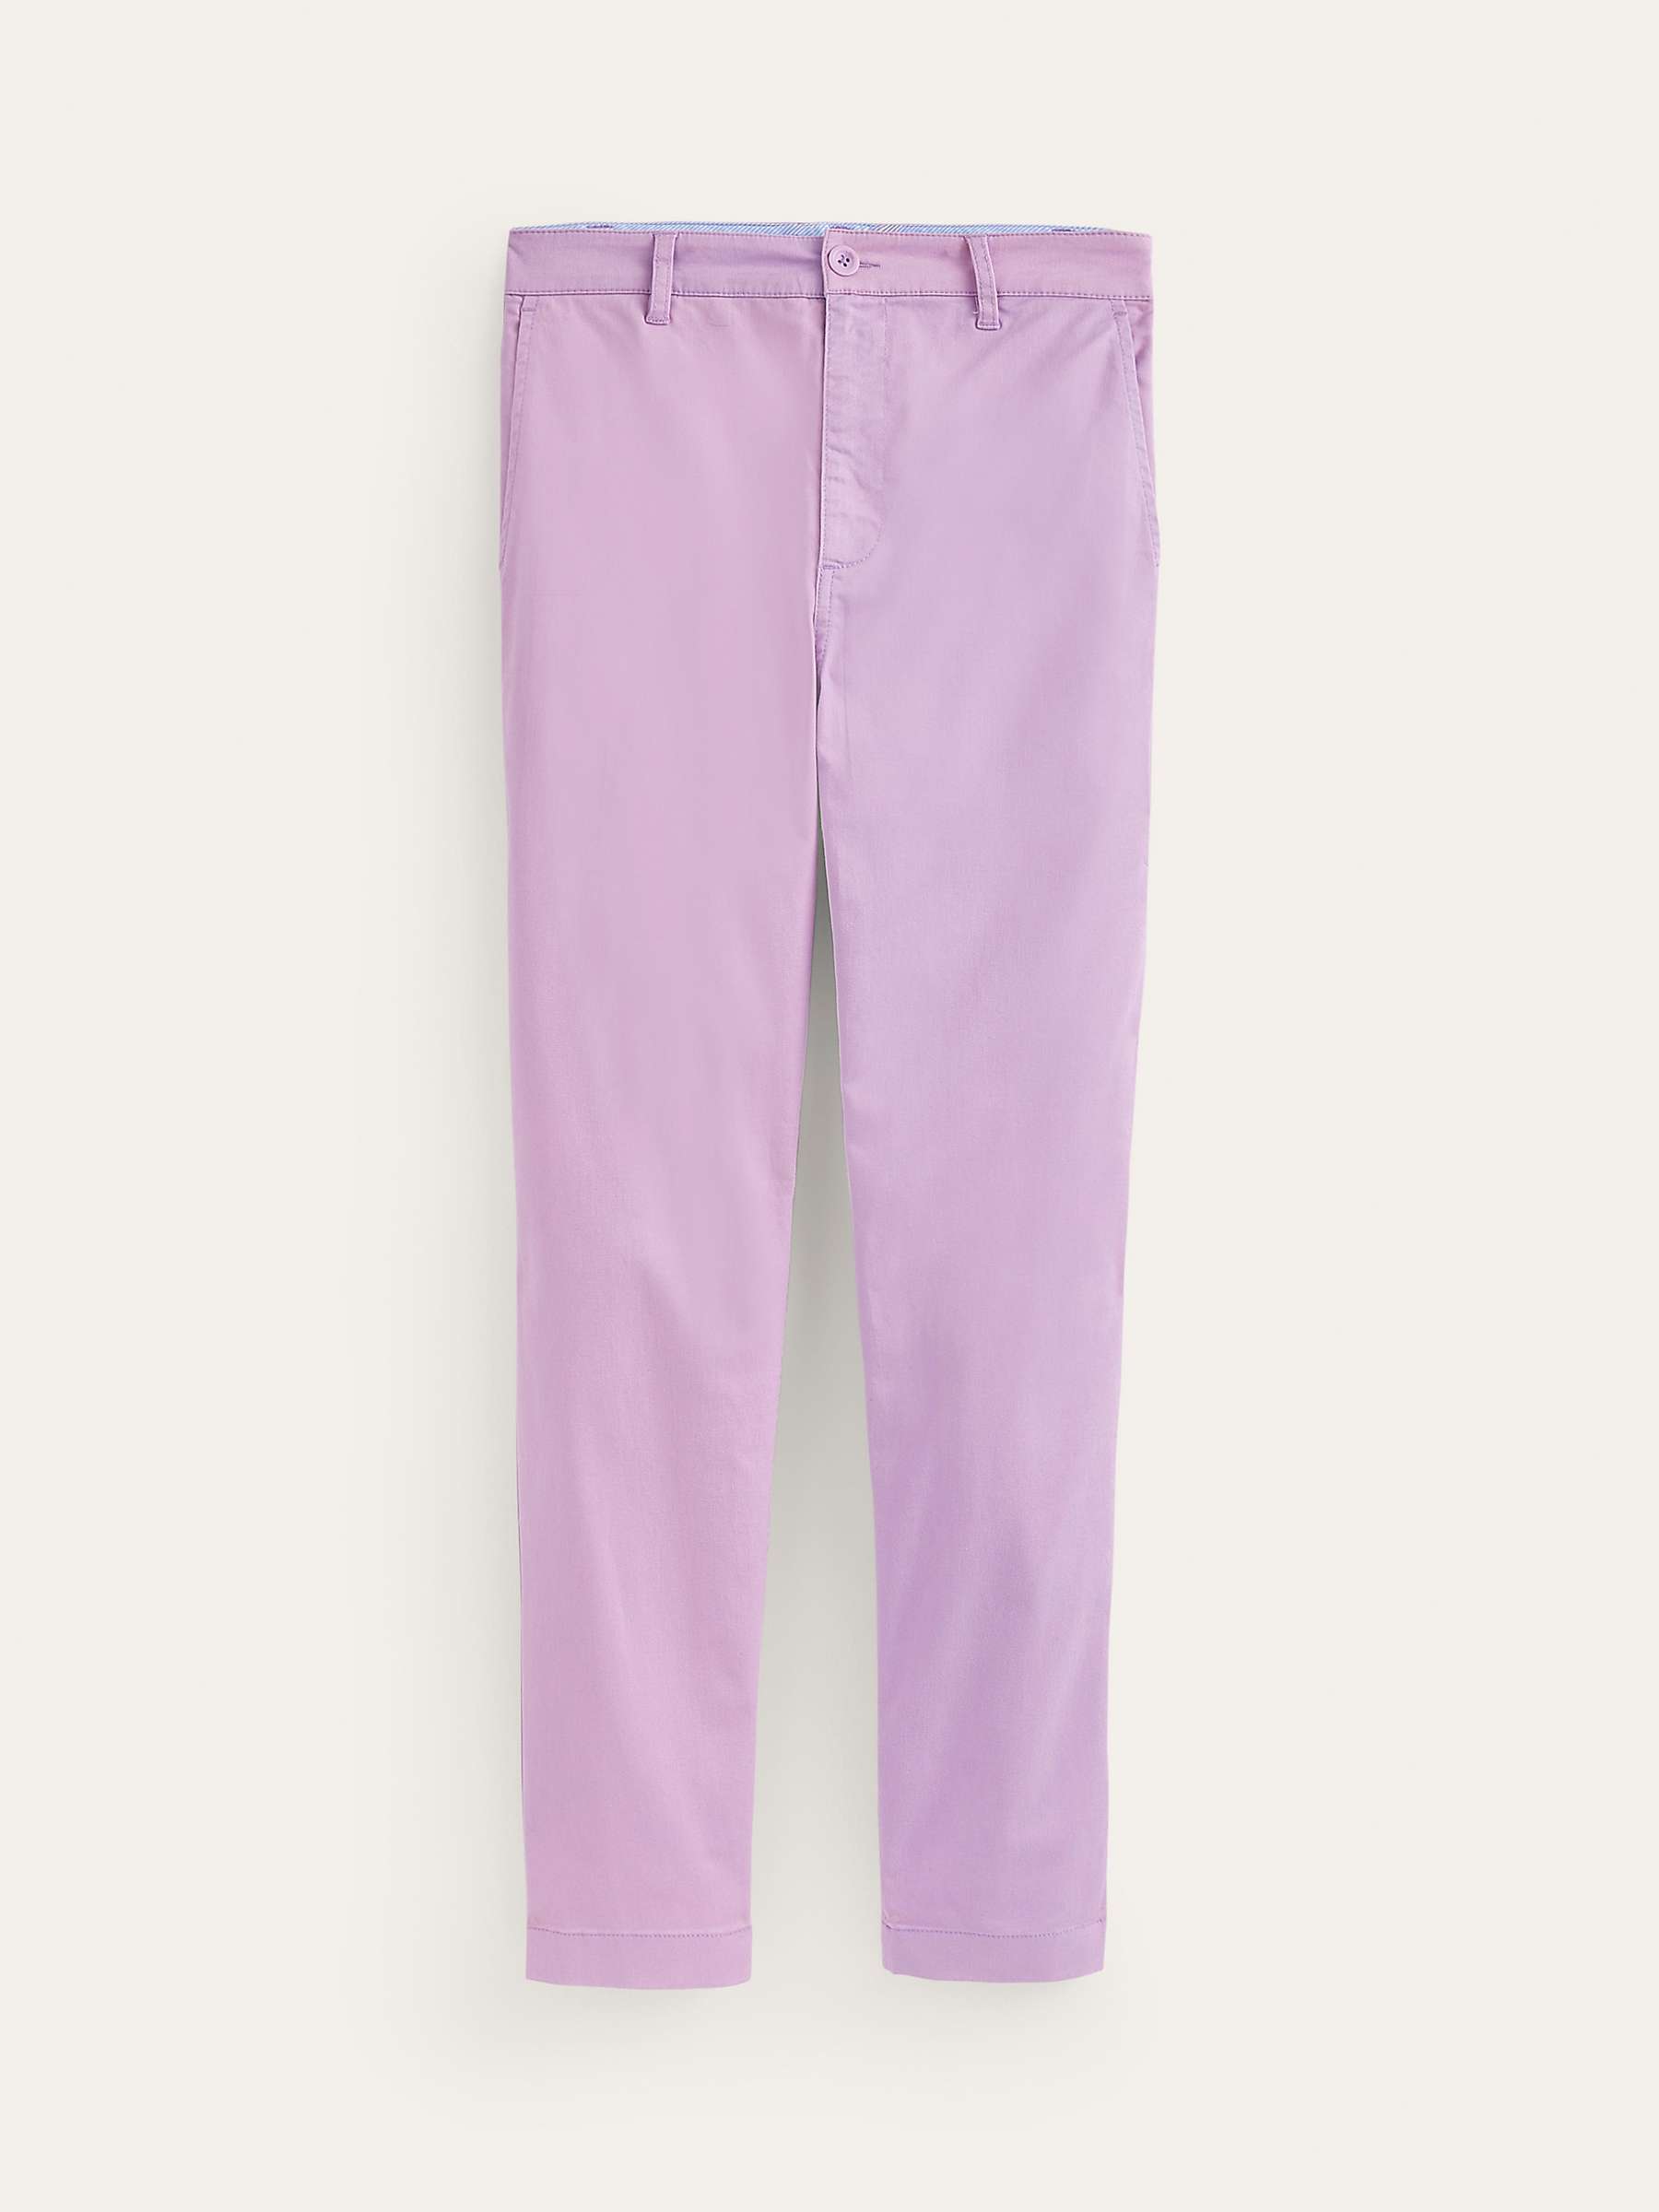 Buy Boden Barnsbury Chino Trousers, Orchid Bloom Online at johnlewis.com